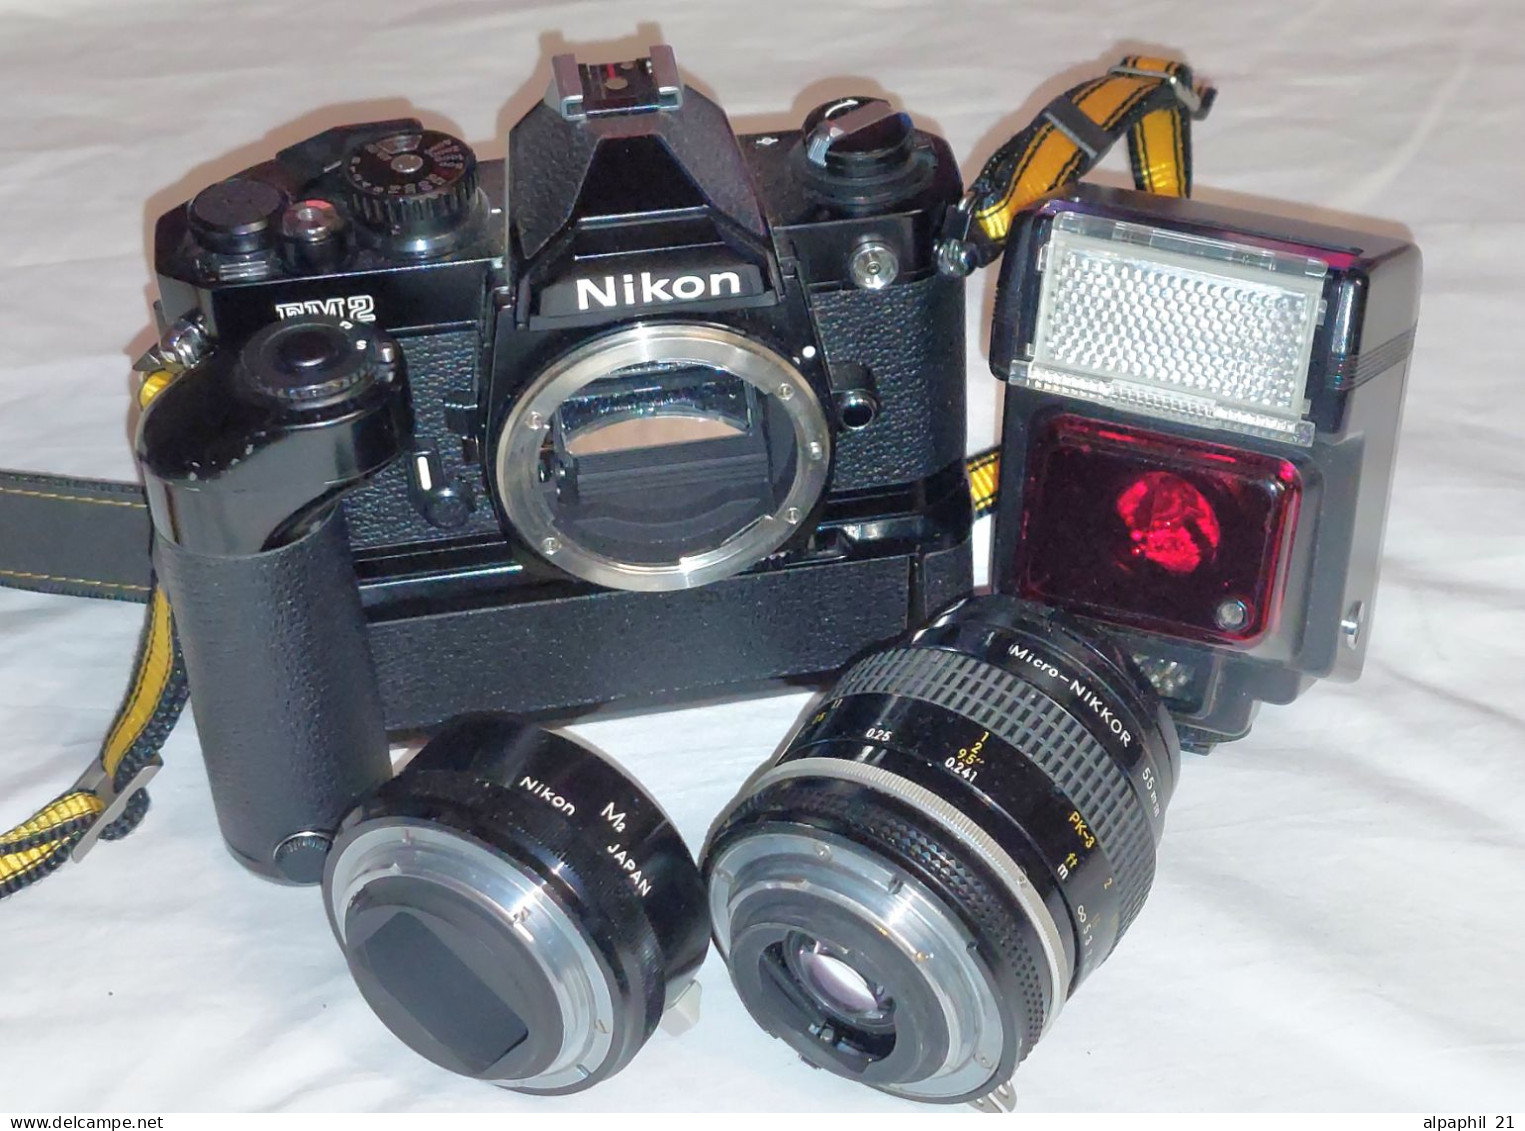 Nikon FM2 35mm film camera with Micro Nikkor 55/3.5 and M2